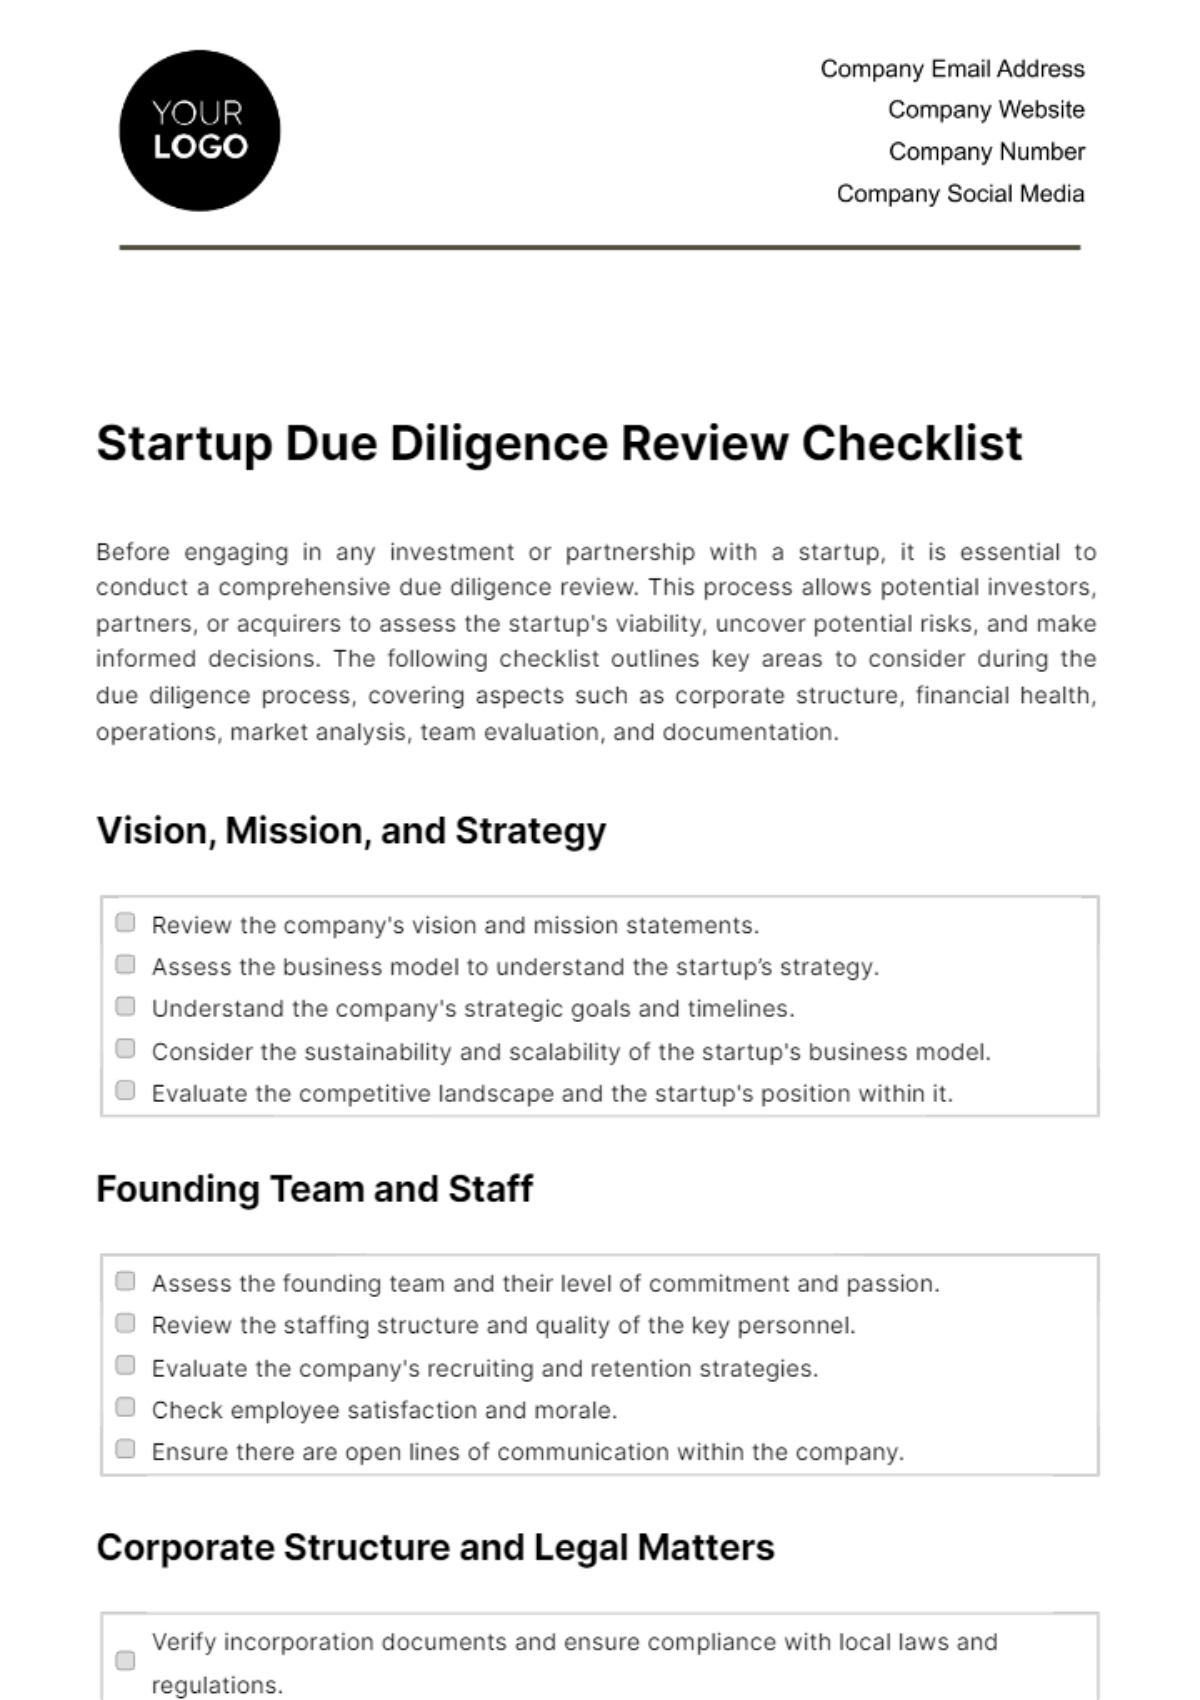 Free Startup Due Diligence Review Checklist Template